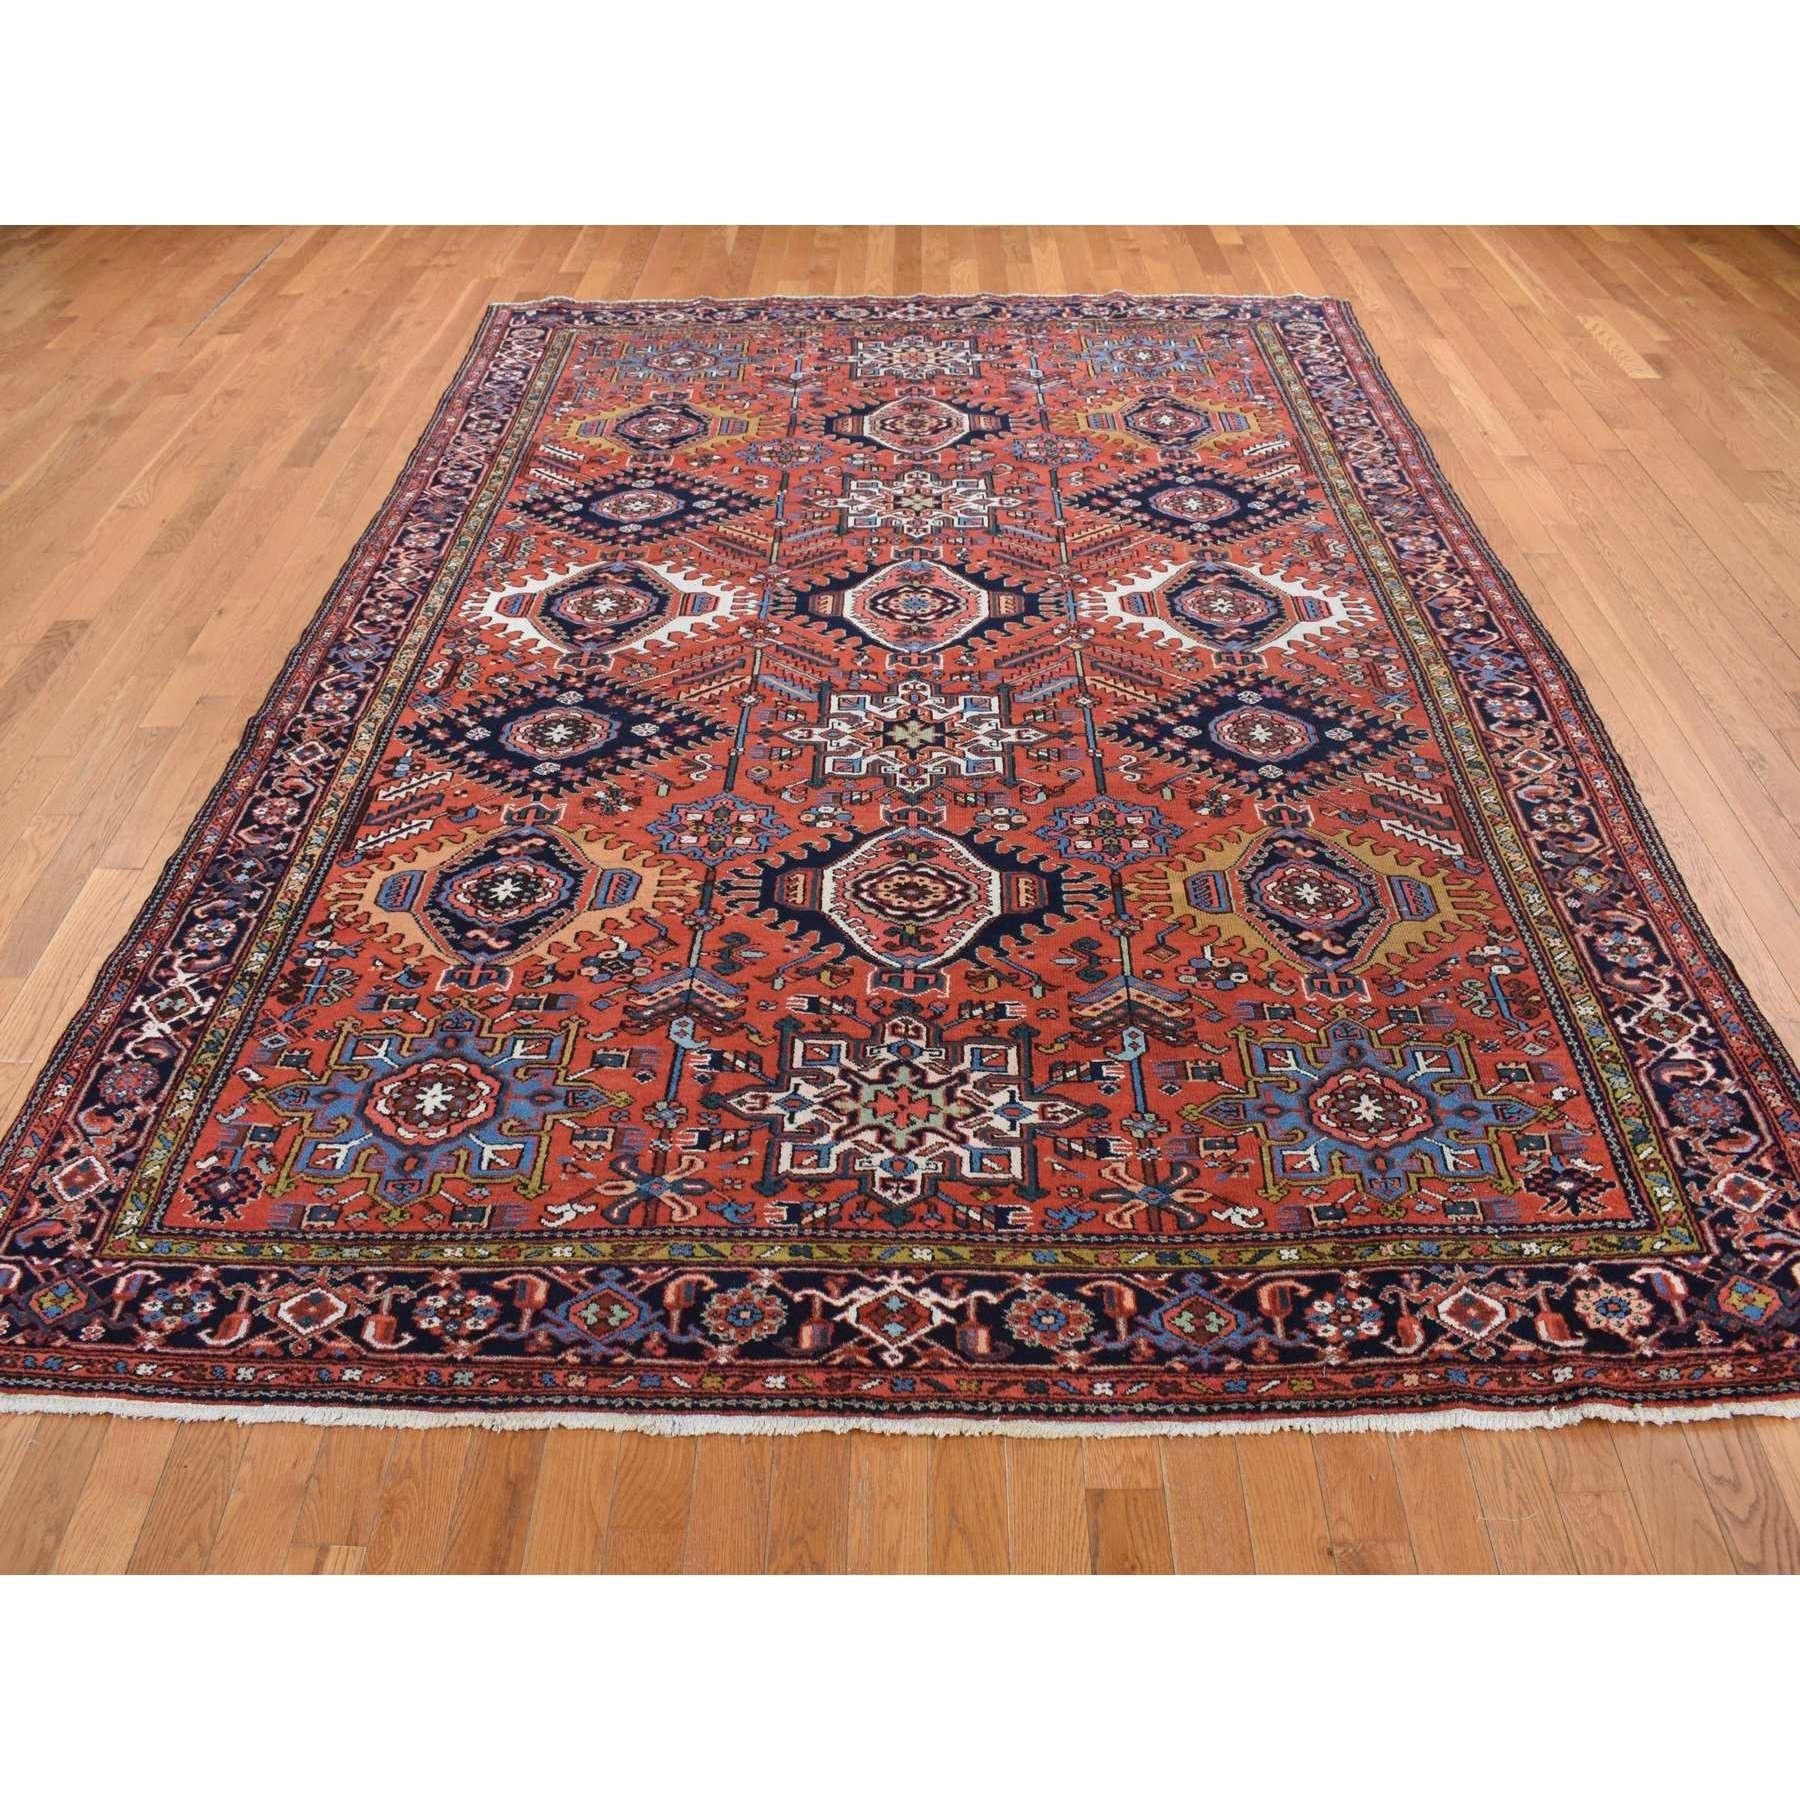 Medieval Red Antique Persian Karajeh Geometric Medallions Hand Knotted Pure Wool Rug For Sale